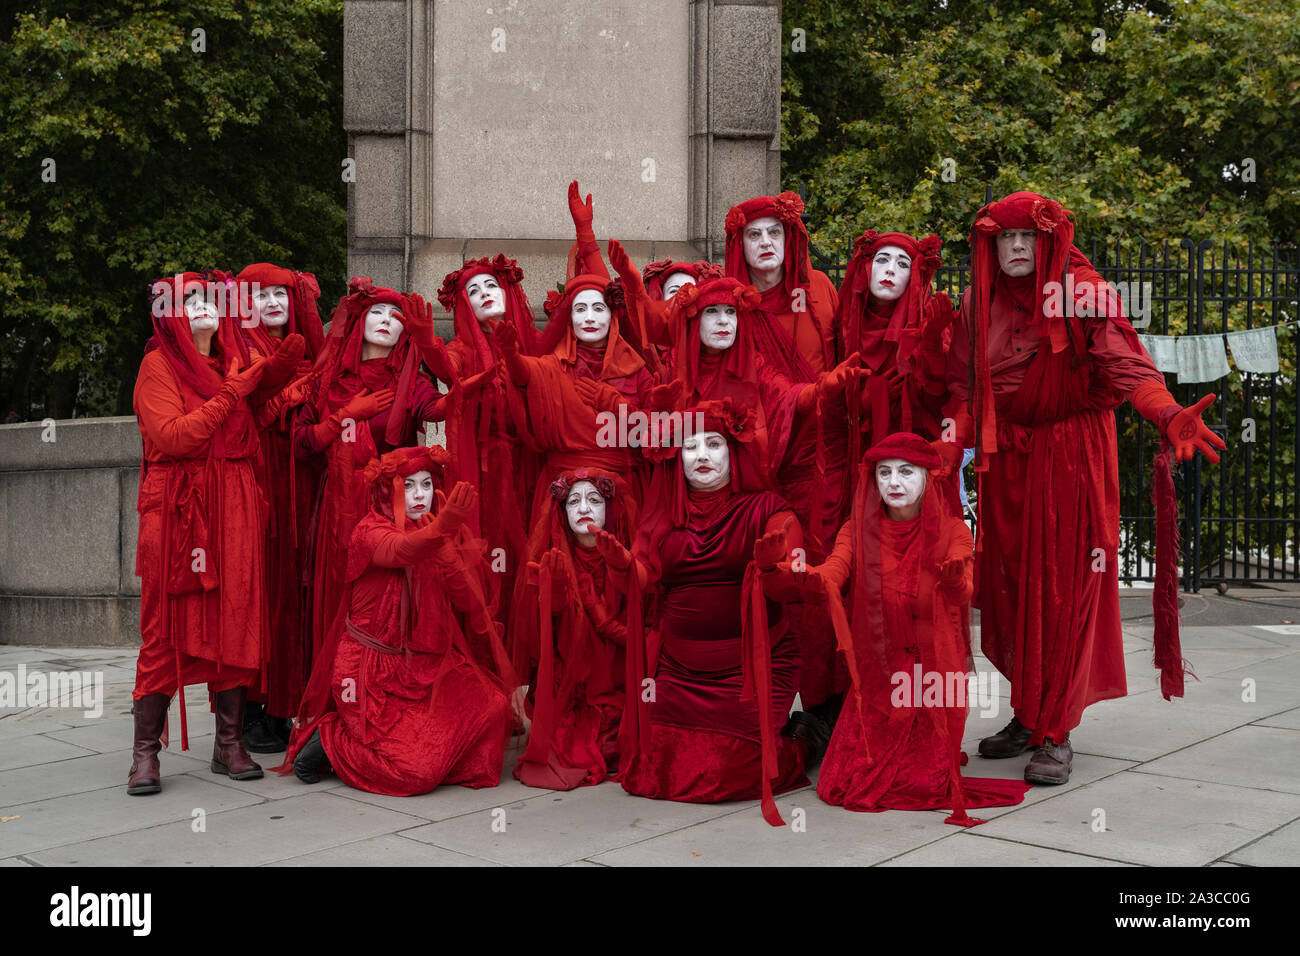 Extinction Rebellion's 'Red Rebel Brigade' join the climate change activists on Lambeth Bridge wearing their trademark blood red outfits. London, UK. Stock Photo